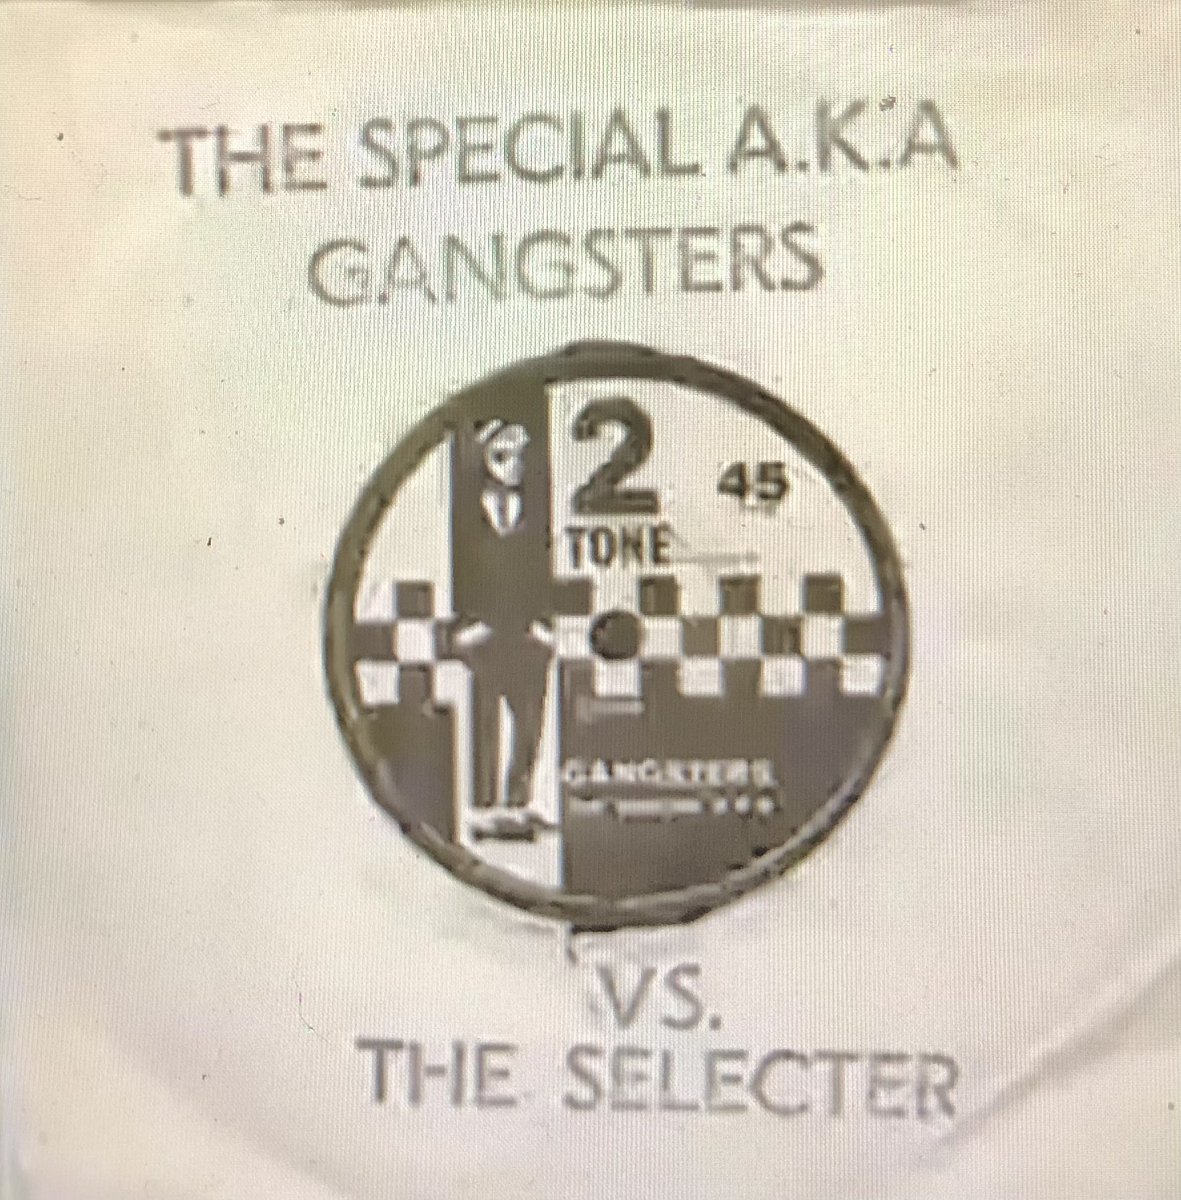 In the beginning, 45 years ago on May 4th in 1979, the first single by 2-Tone Records was released featuring songs by The Specials & The Selecter Gangsters v The Selecter.